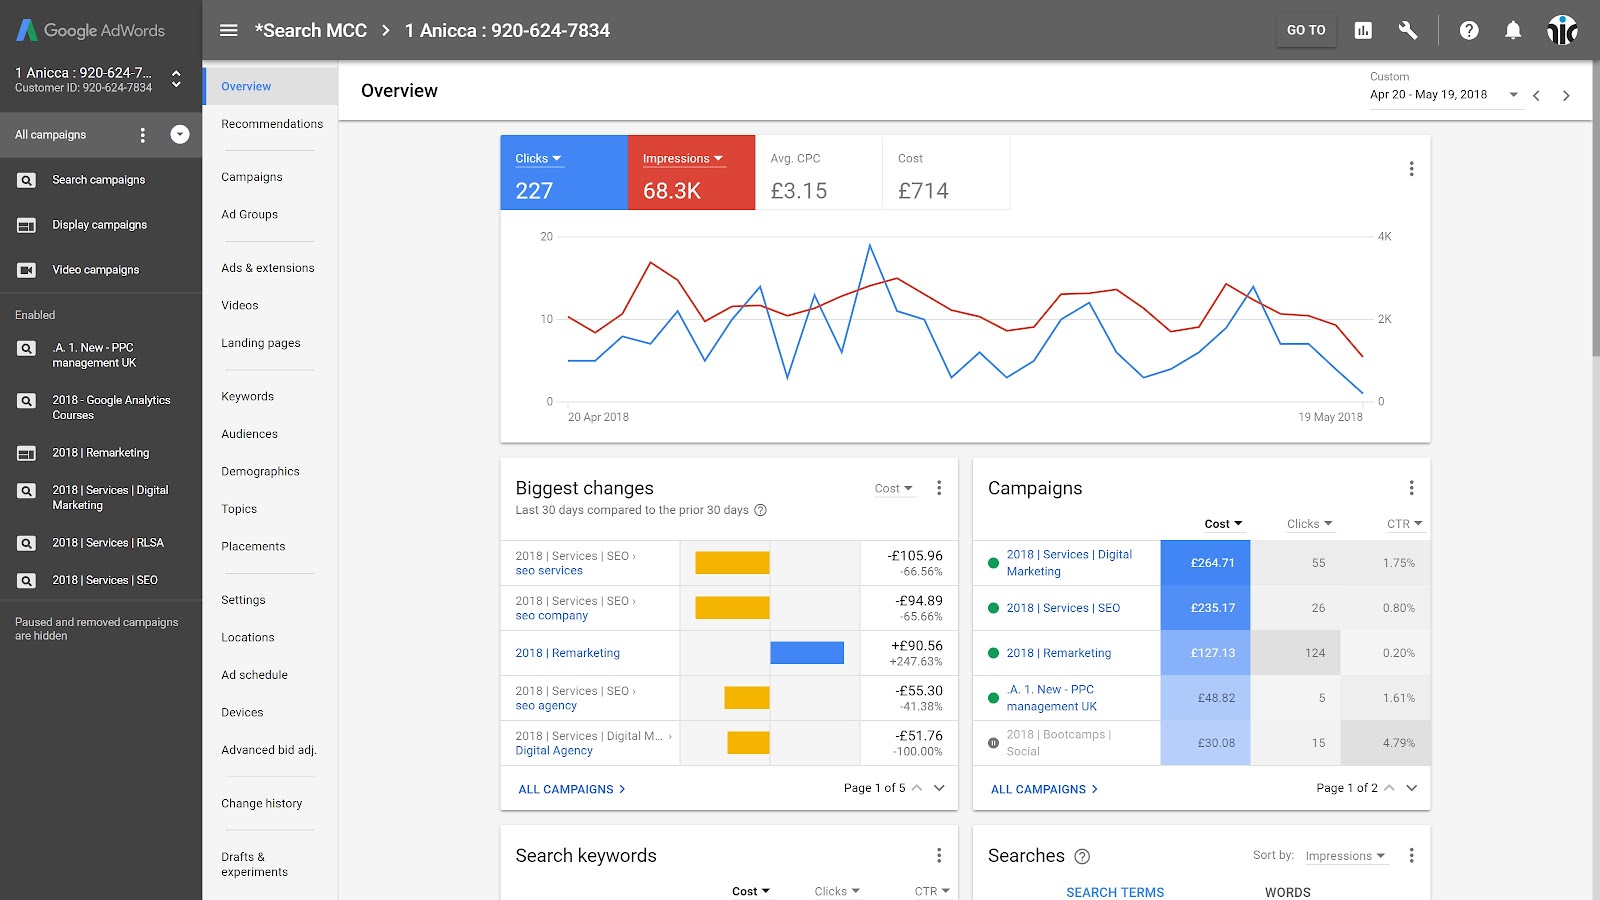 Google Ads and Shopify: Using the new Google AdWords dashboard - Search Engine Watch